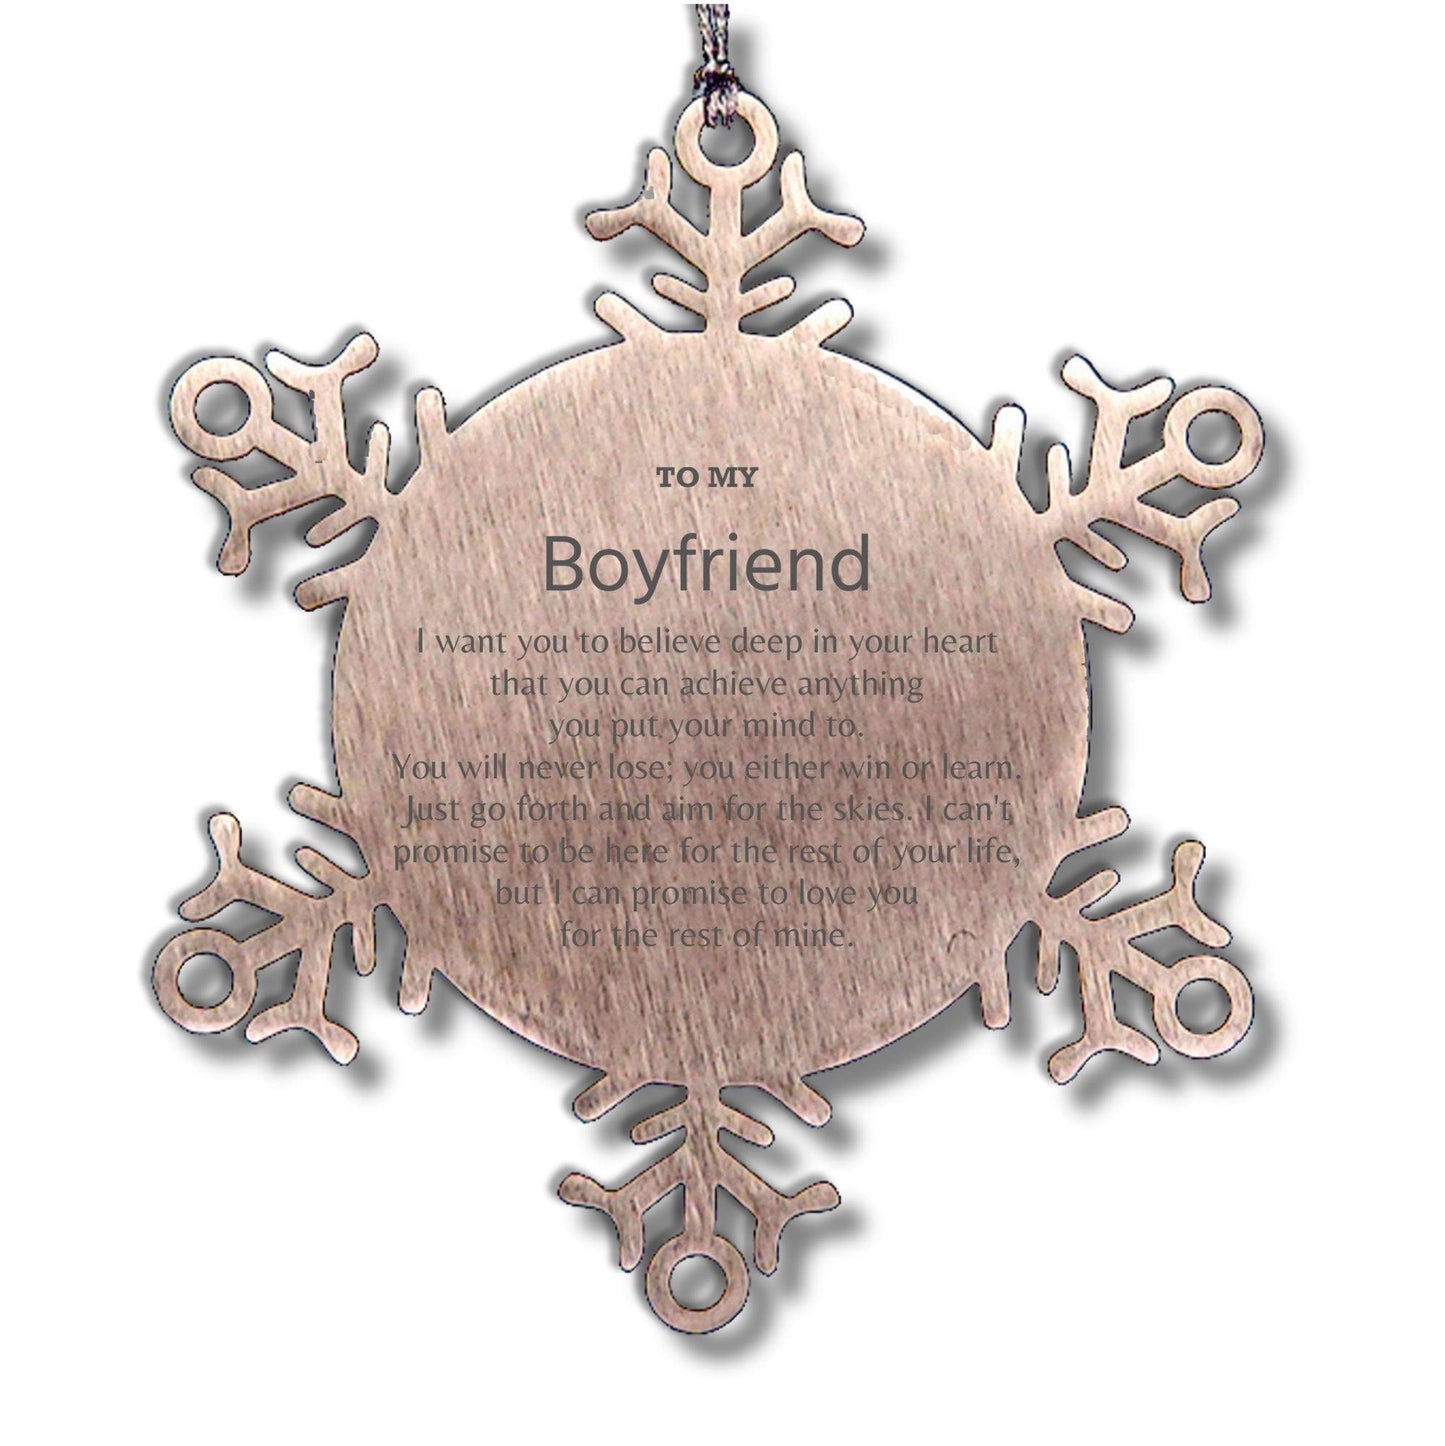 Motivational Boyfriend Snowflake Ornament, Boyfriend I can promise to love you for the rest of mine, Christmas Birthday Gifts - Mallard Moon Gift Shop